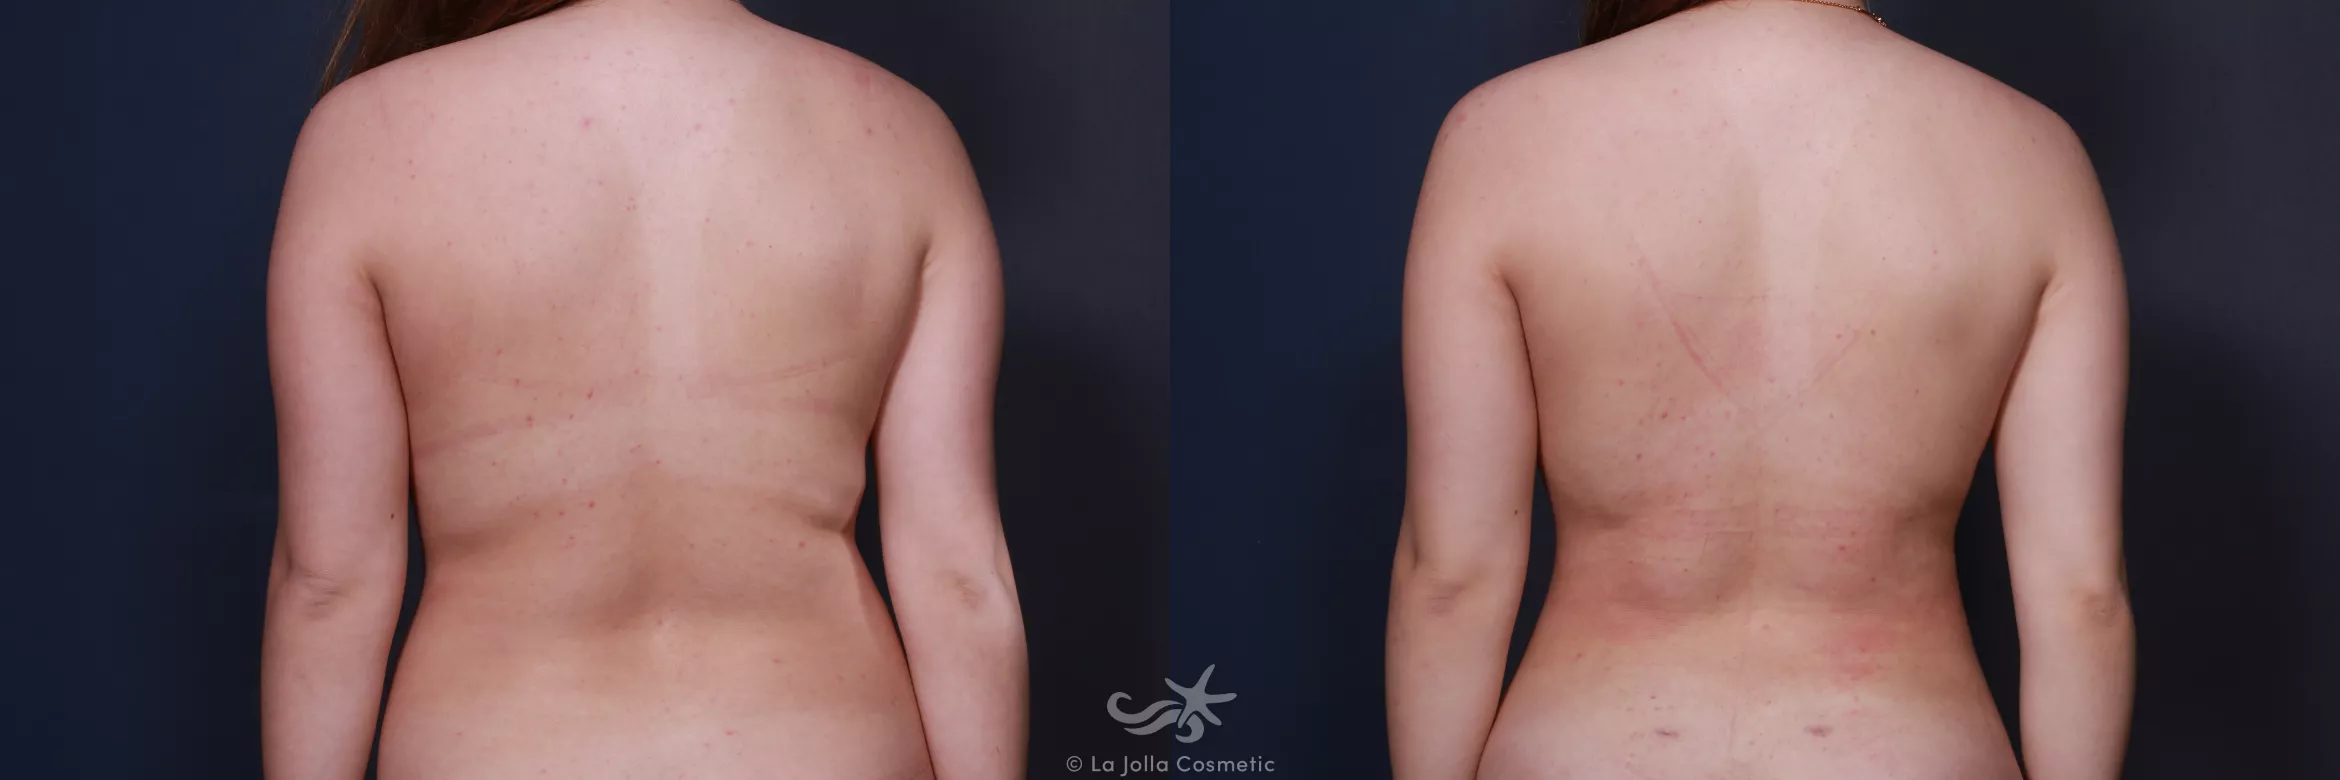 Before & After High Definition Liposuction Result 570 Back View in San Diego, CA